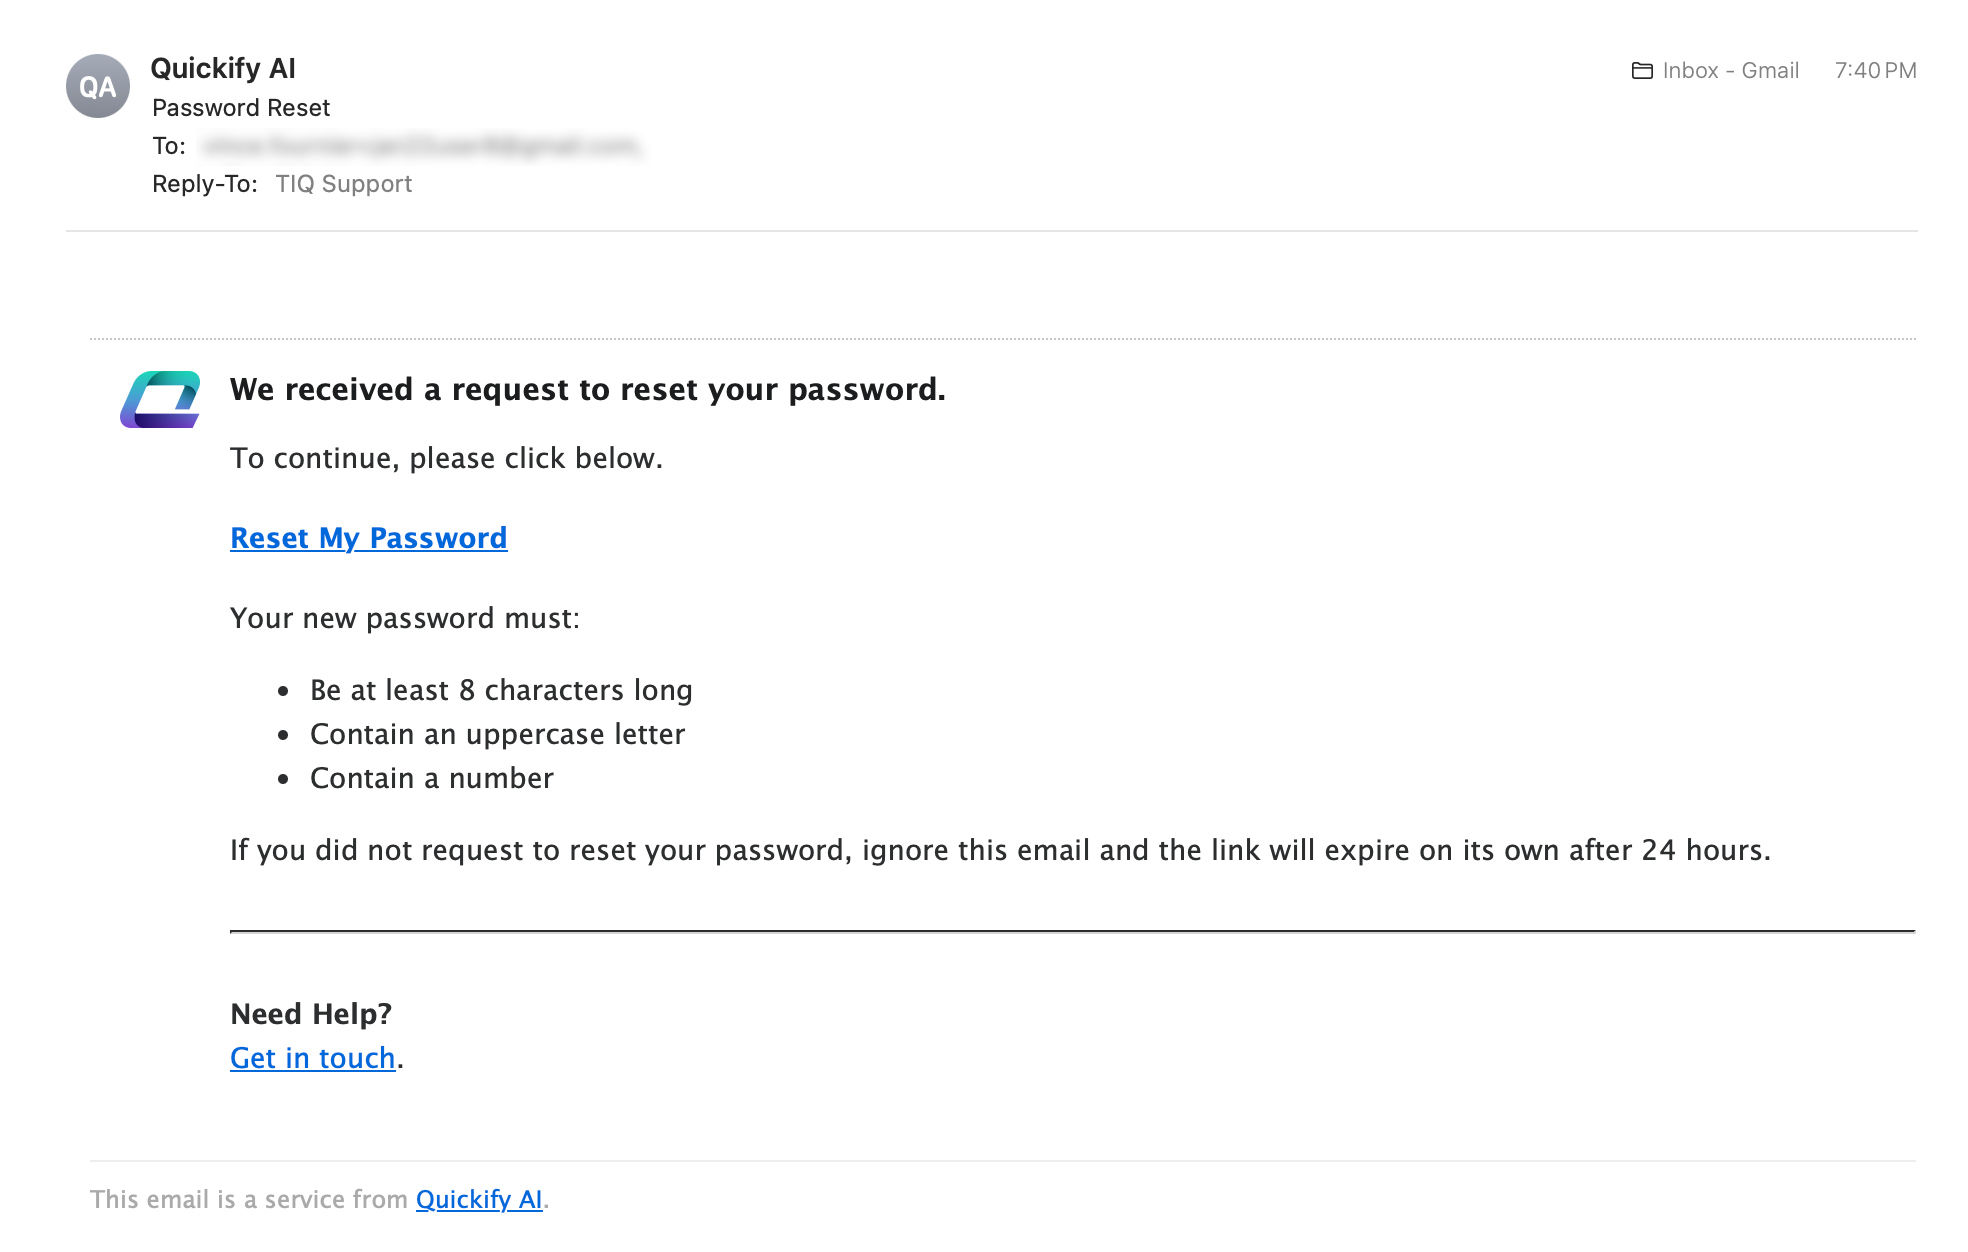 quickify-ai-reset-password-email.jpg